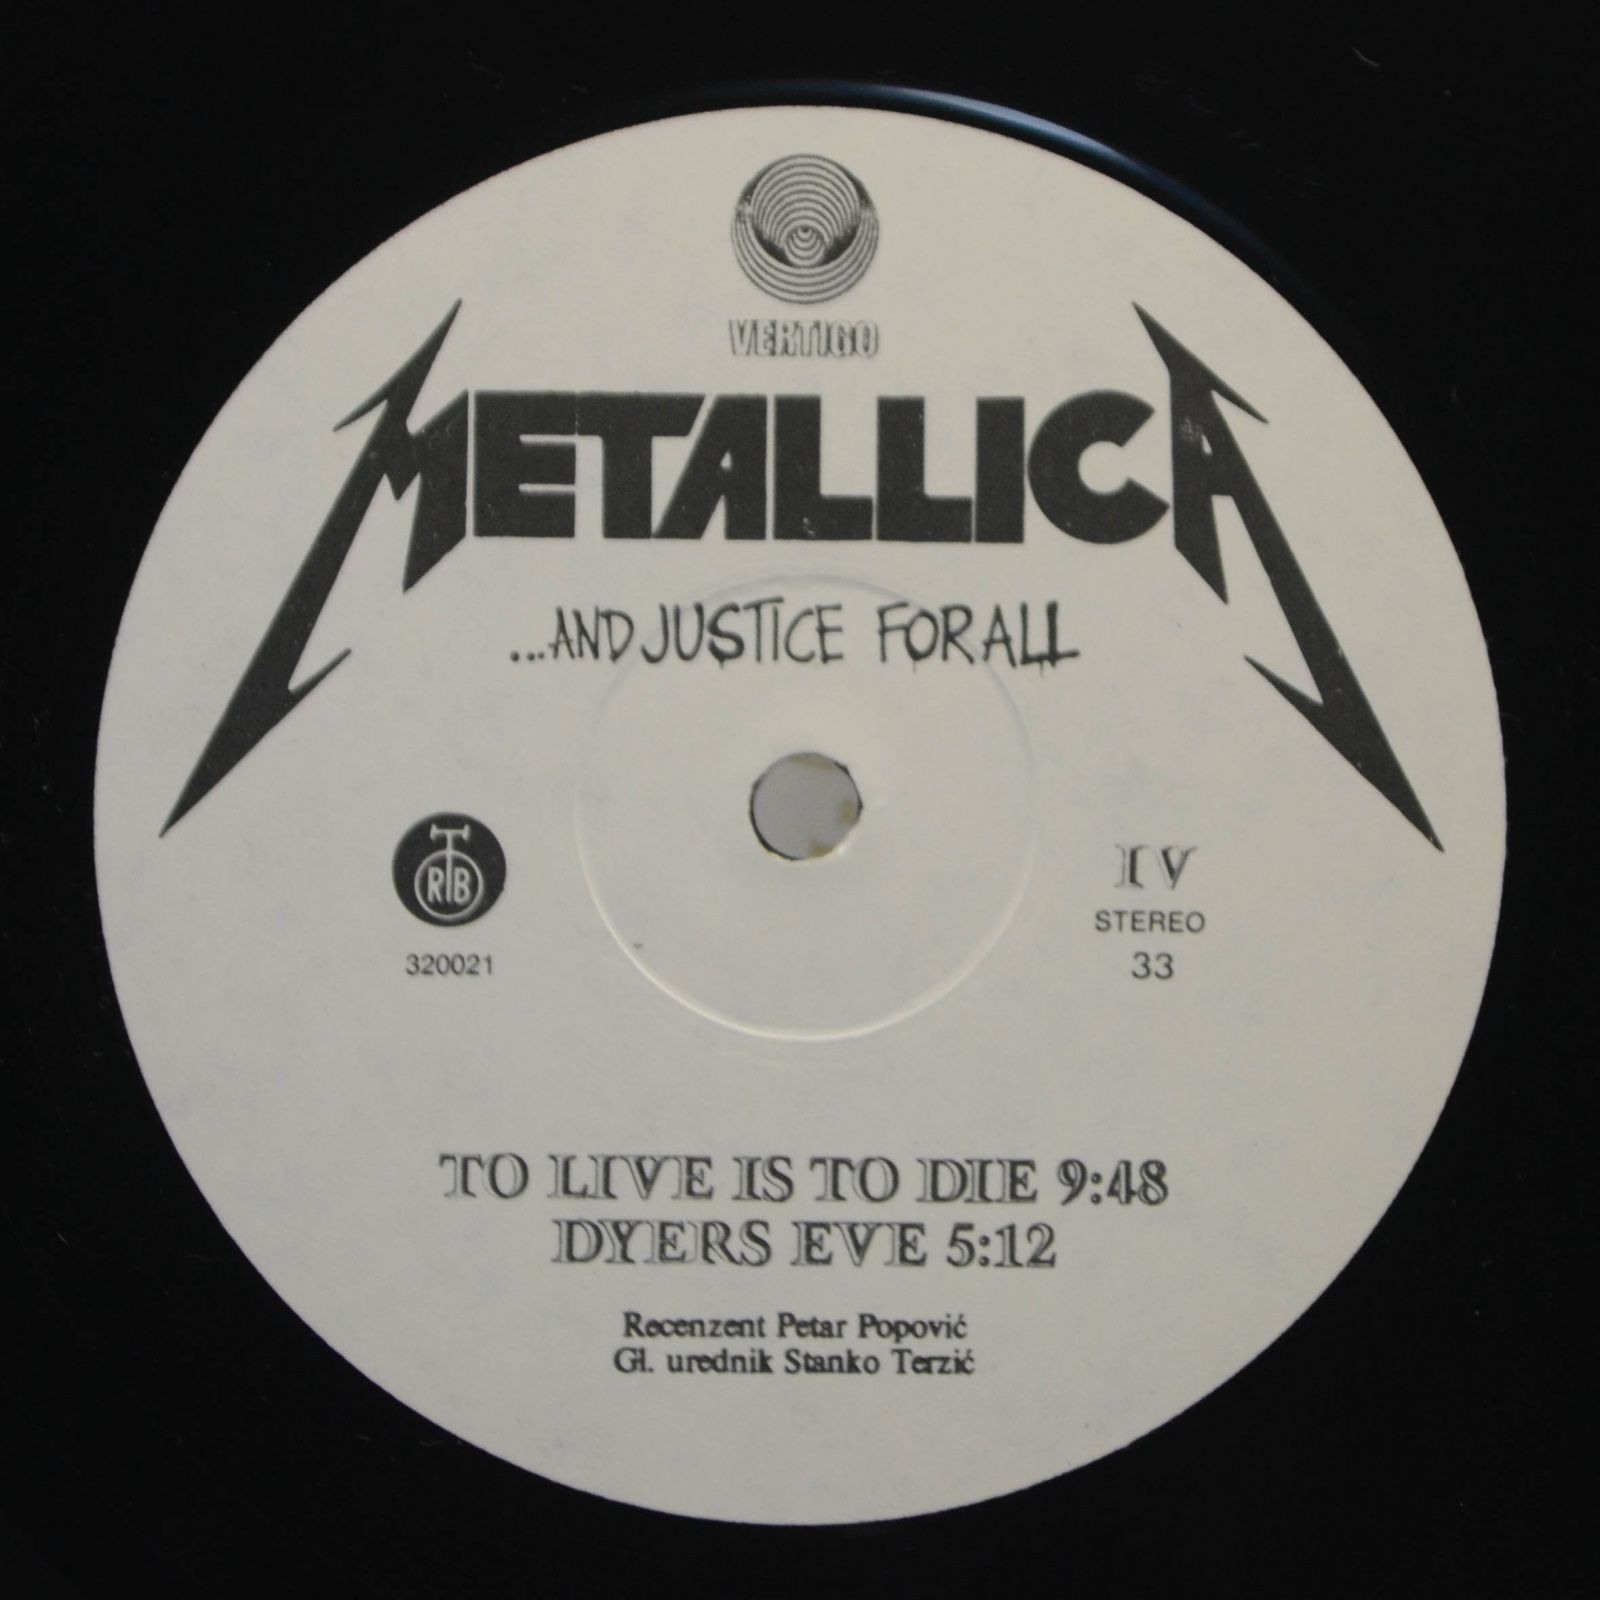 Metallica — ...And Justice For All, 1988